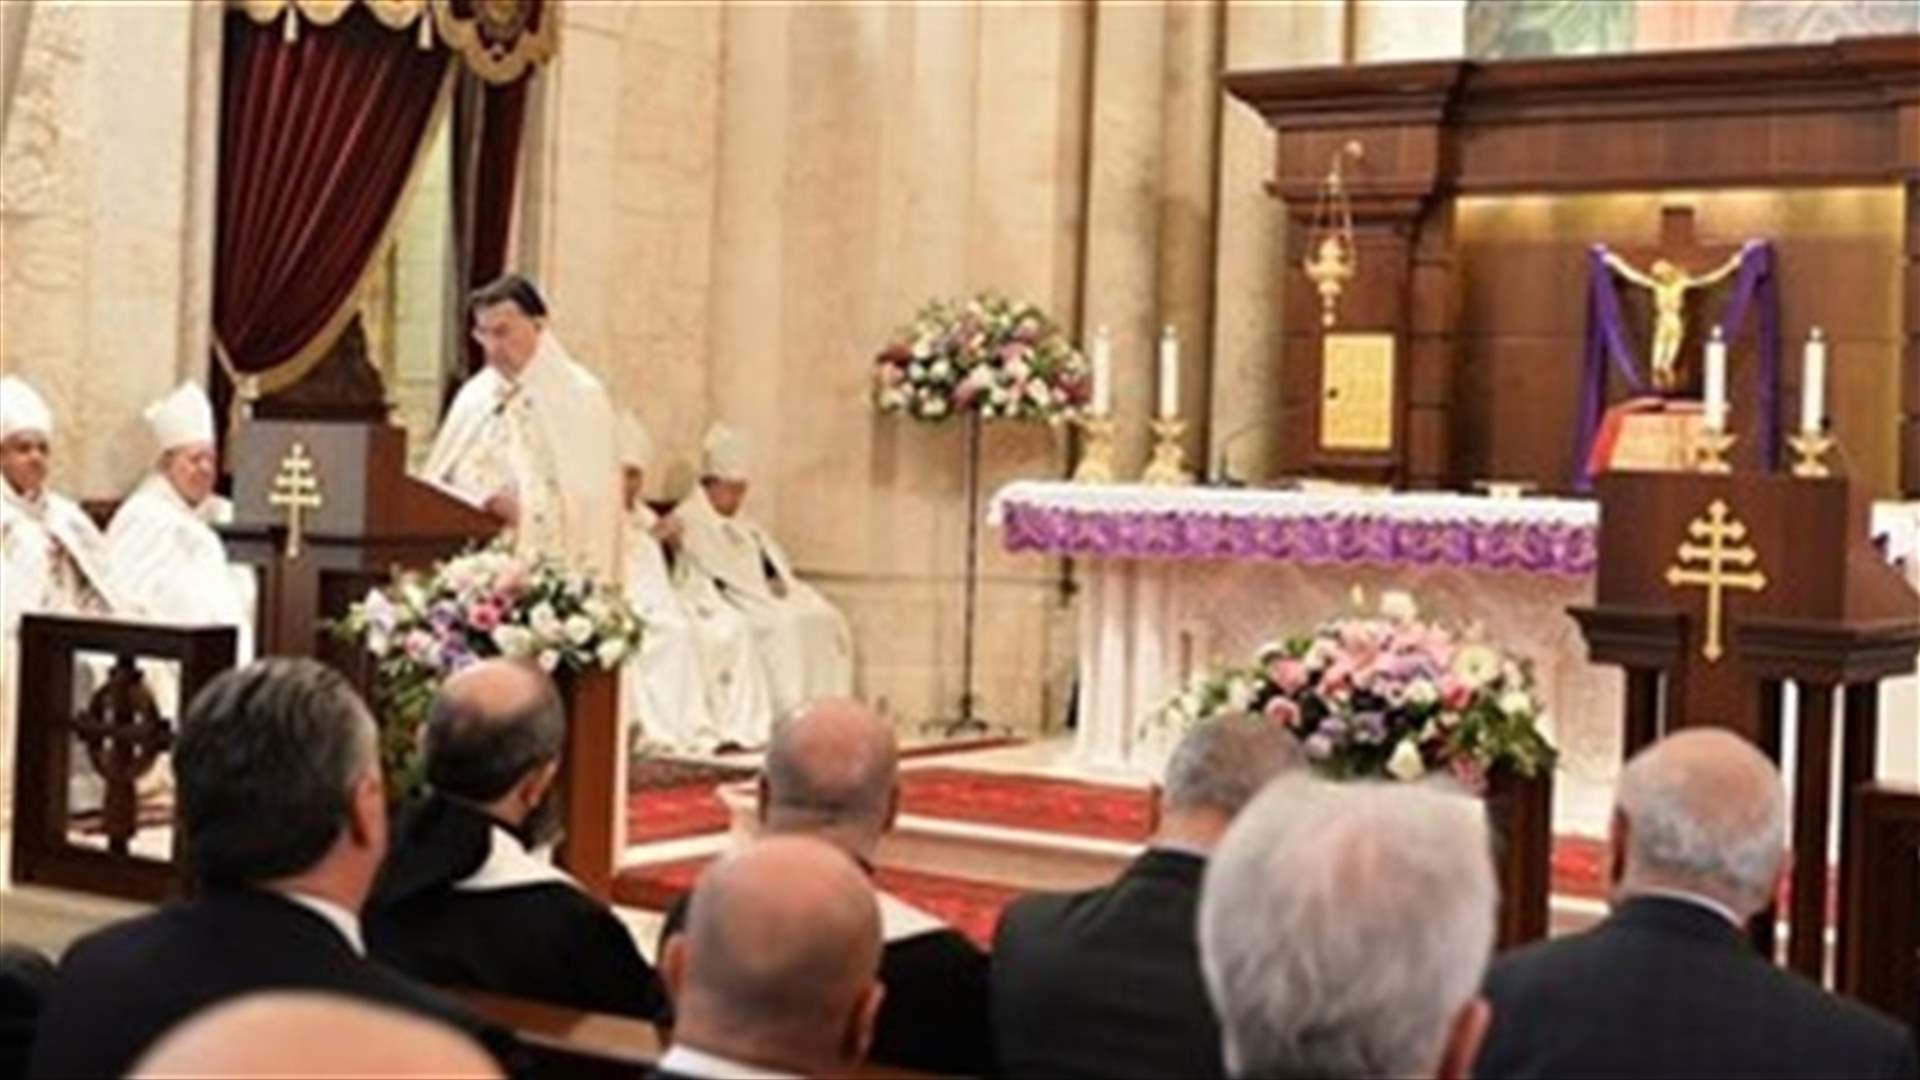 Rai calls during Annunciation Day mass on officials to provide public good